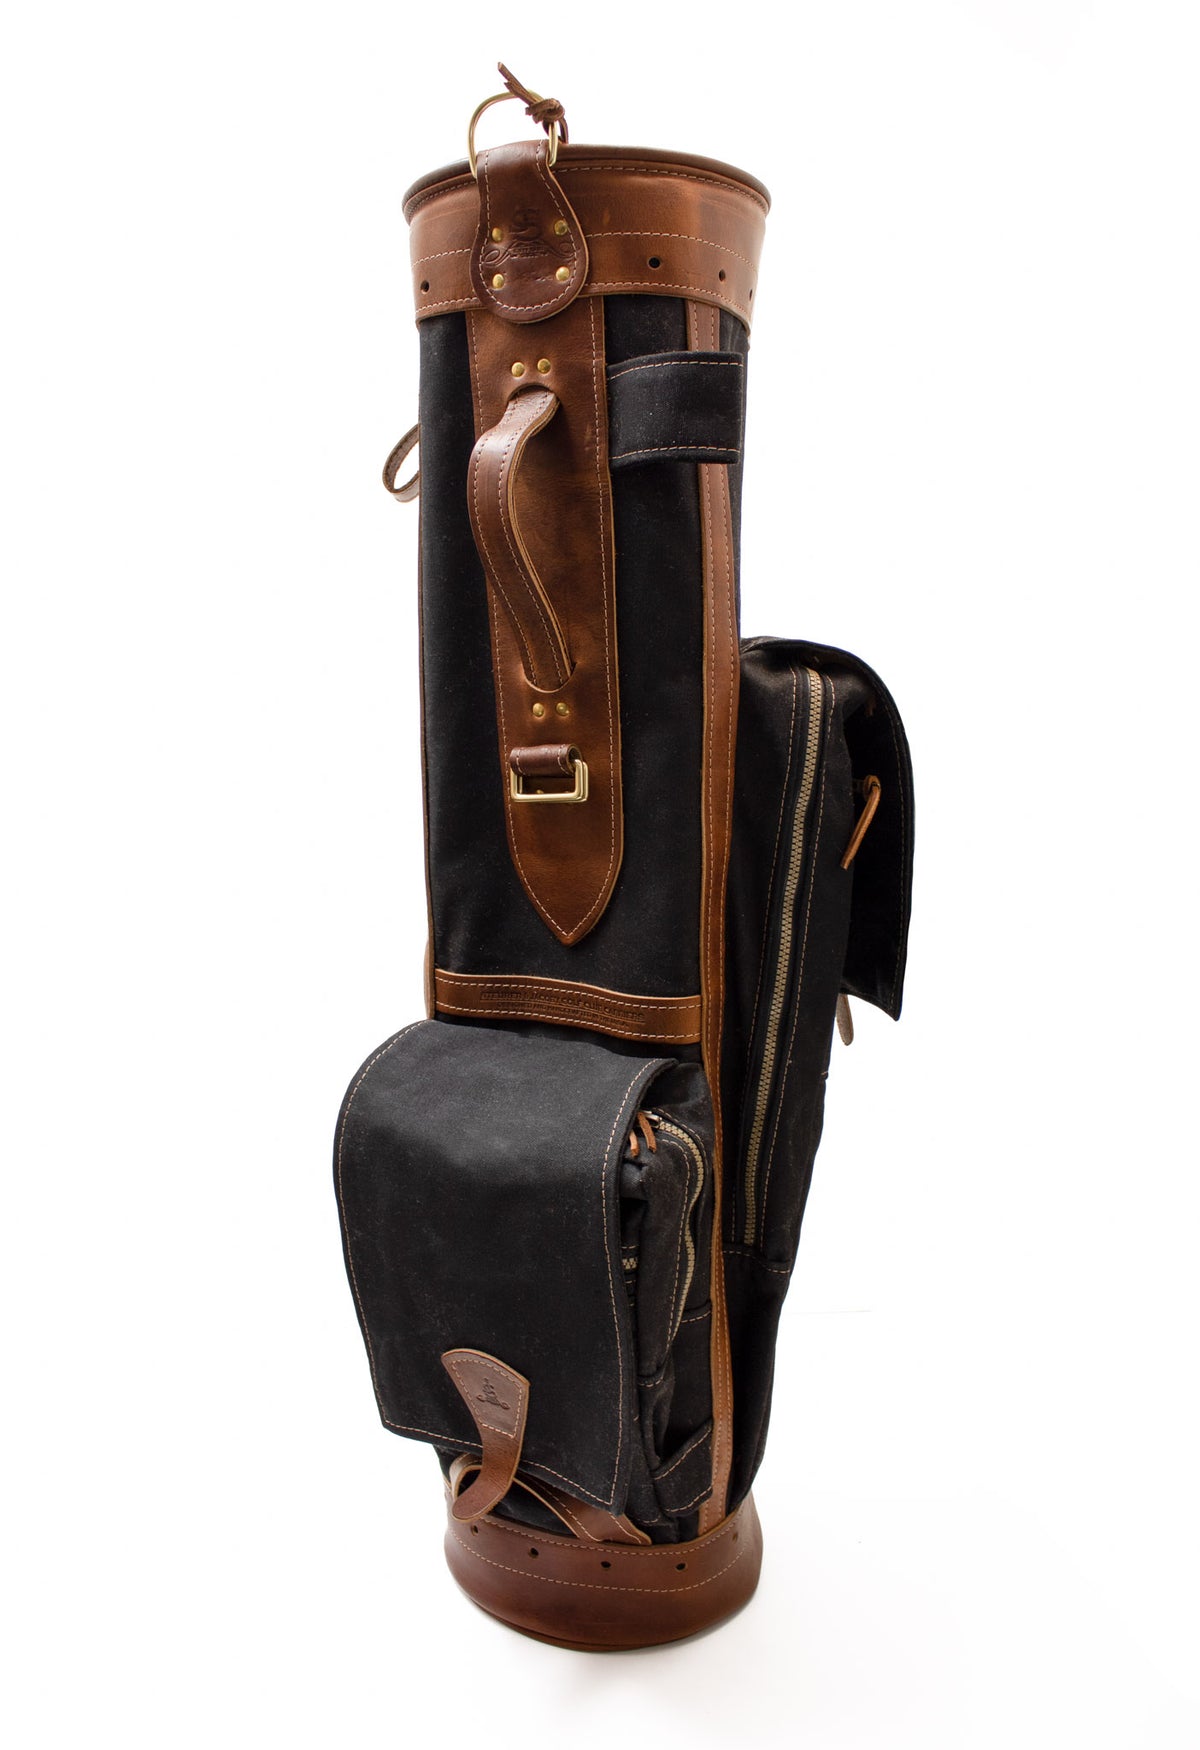 8" Black Waxed Canvas & Chestnut Leather Airliner Style Golf Bag- Steurer & Jacoby